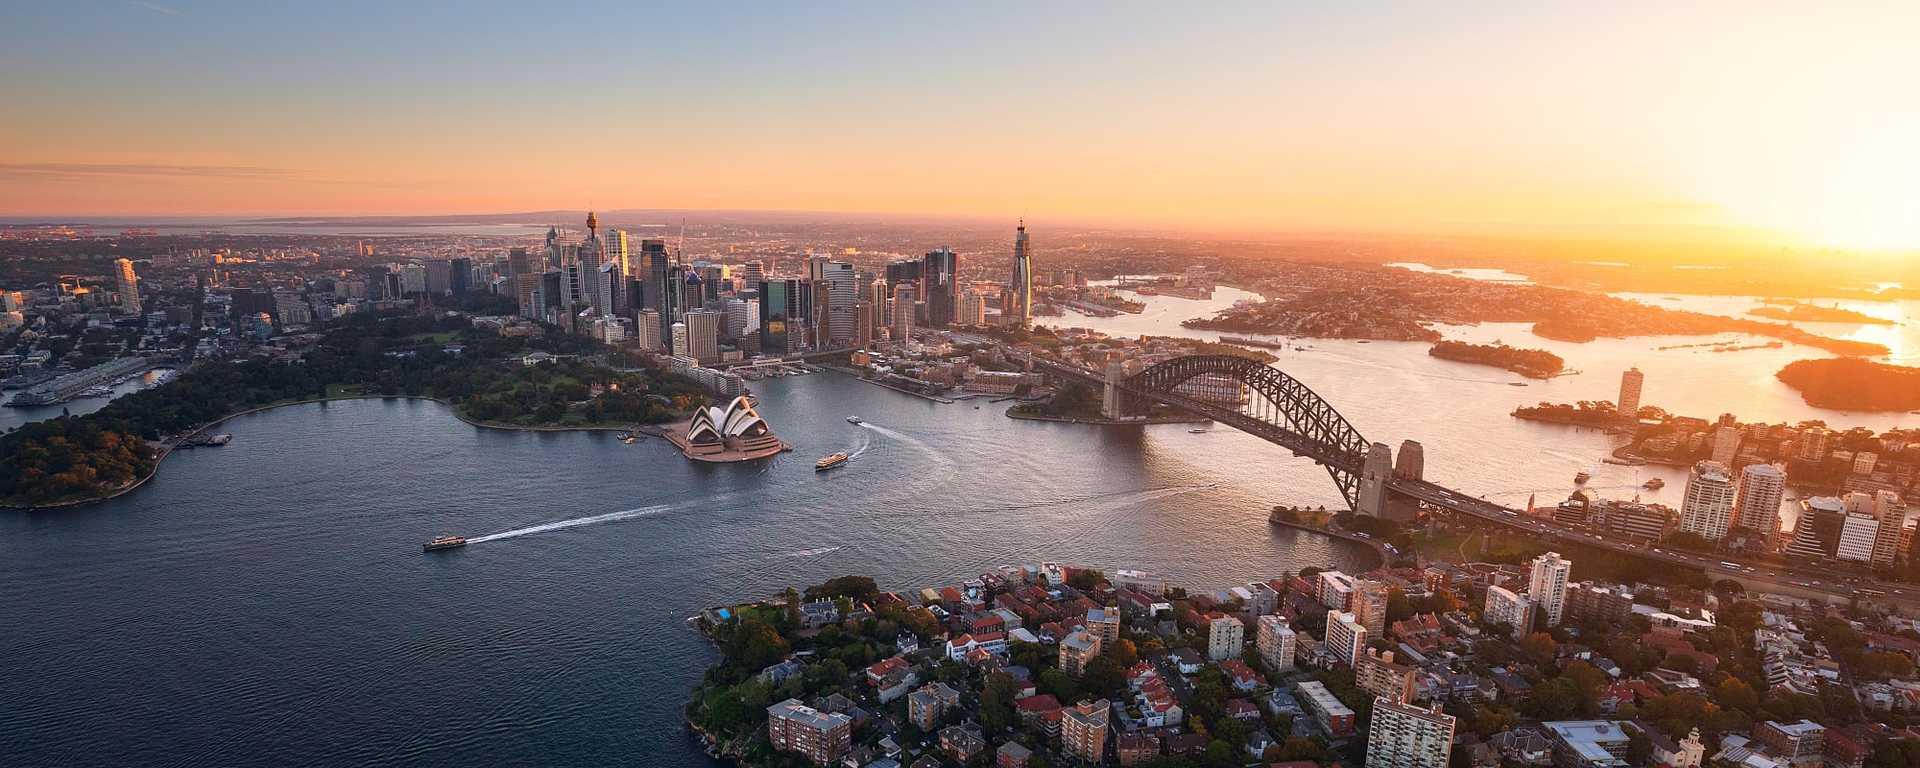 Aerial view of Sydney Harbor with the Opera House and Bridge in Australia